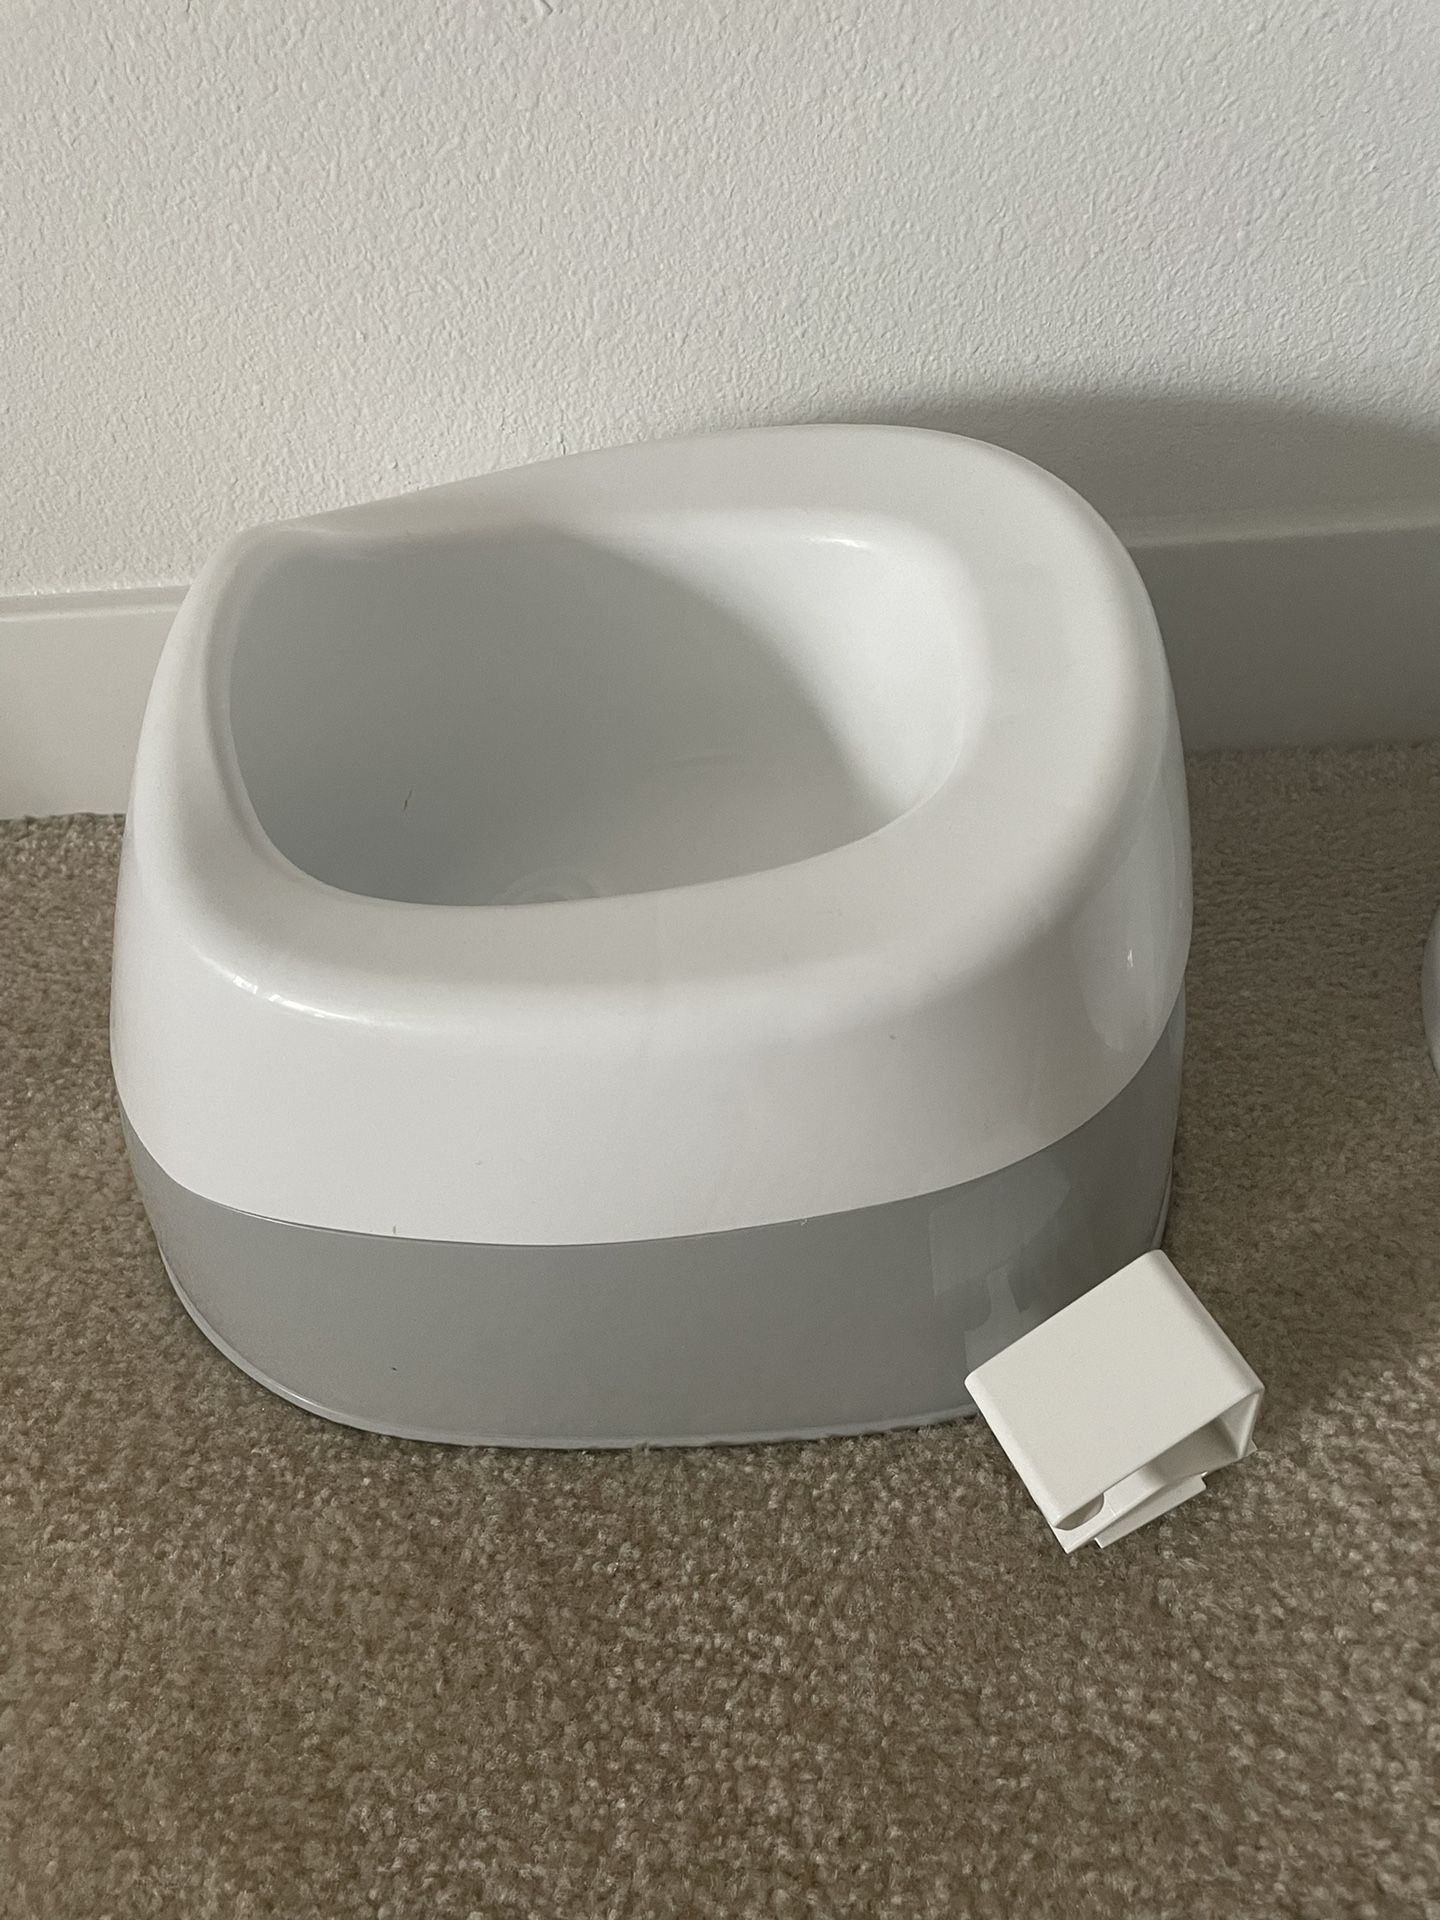 Sit or Stand Potty Chair and Urinal - 2-in-1 Potty Training System